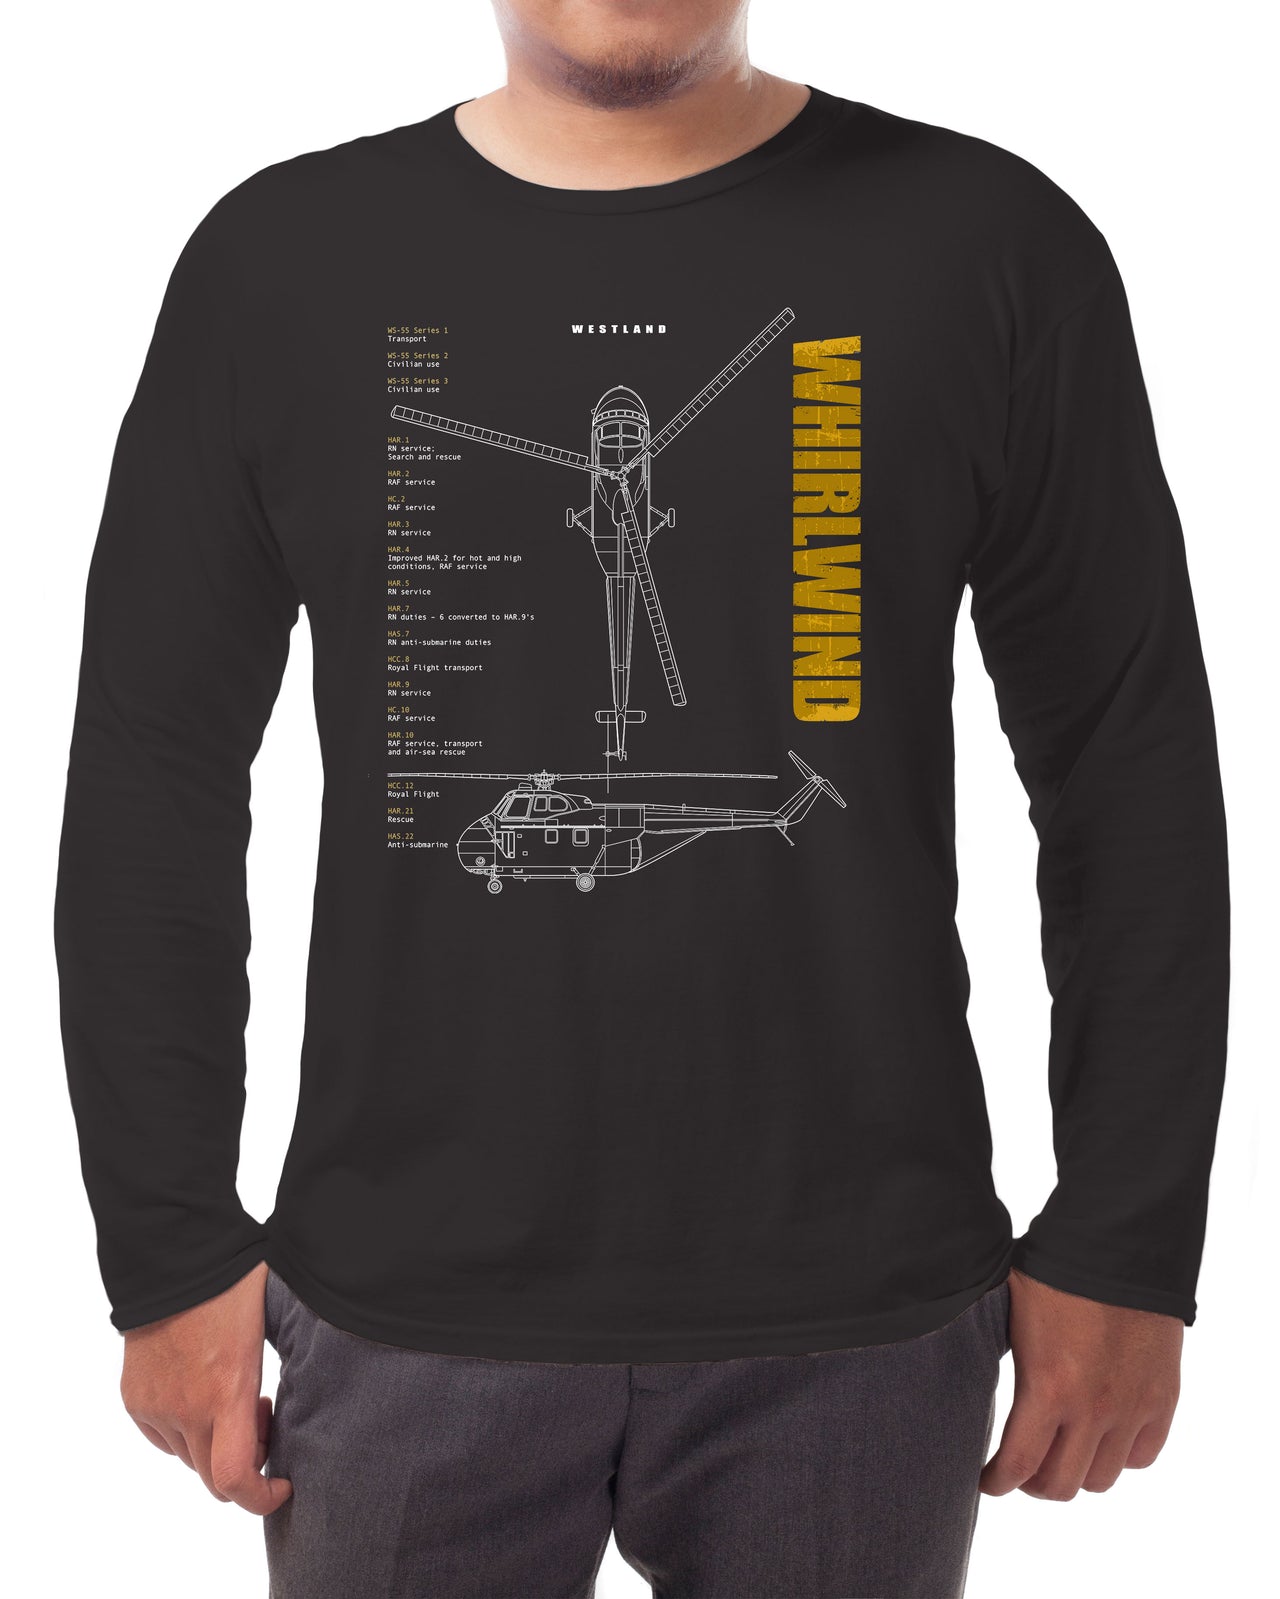 Whirlwind Helicopter - Long-sleeve T-shirt